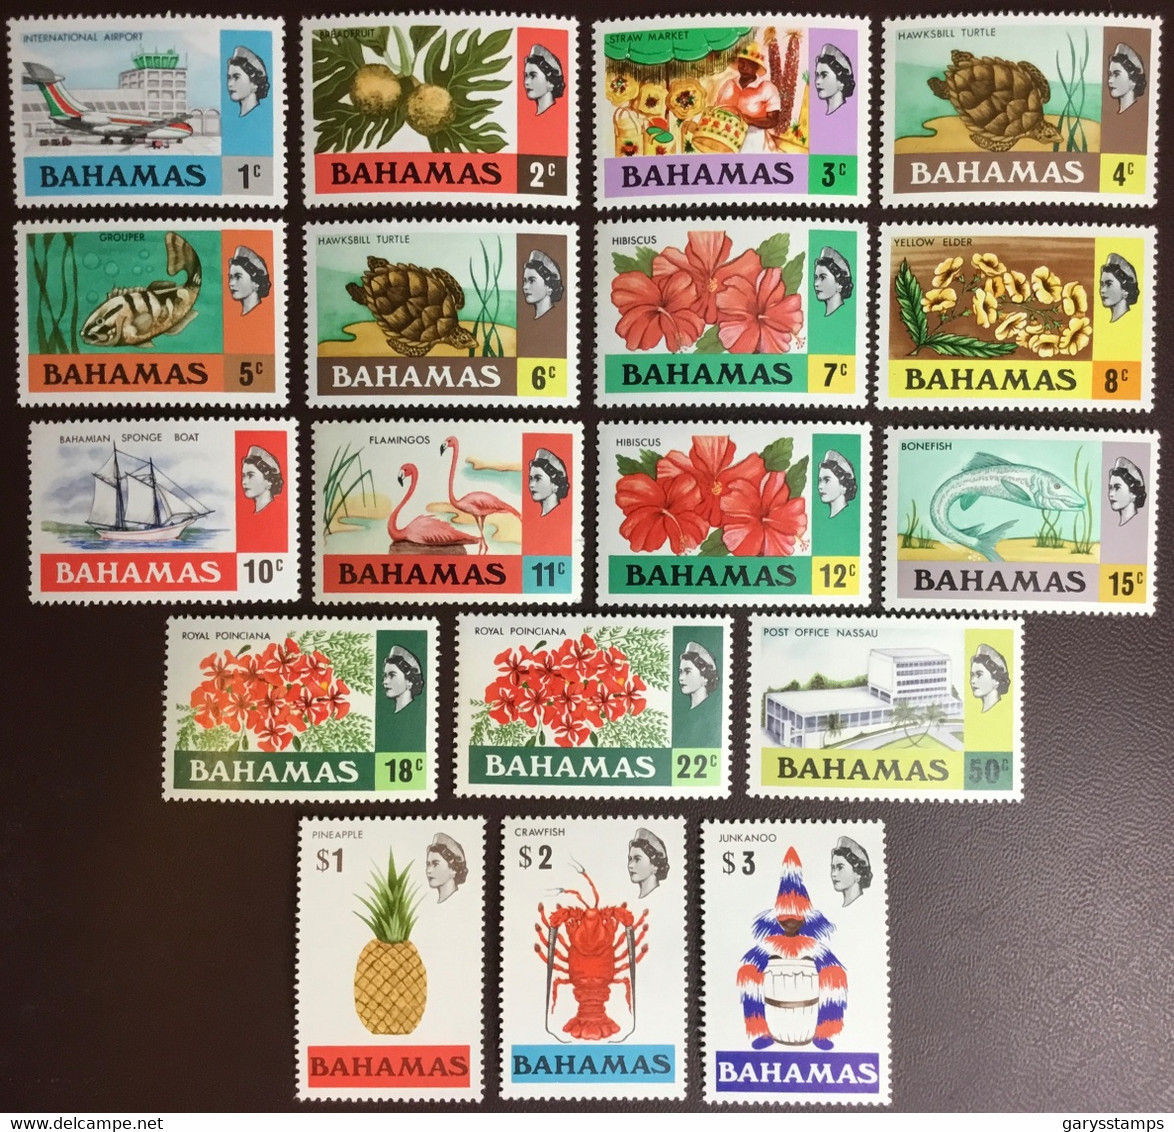 Bahamas 1971 Definitives Set Birds Fish Turtles Flowers Crustaceans Fruit MNH - 1963-1973 Ministerial Government